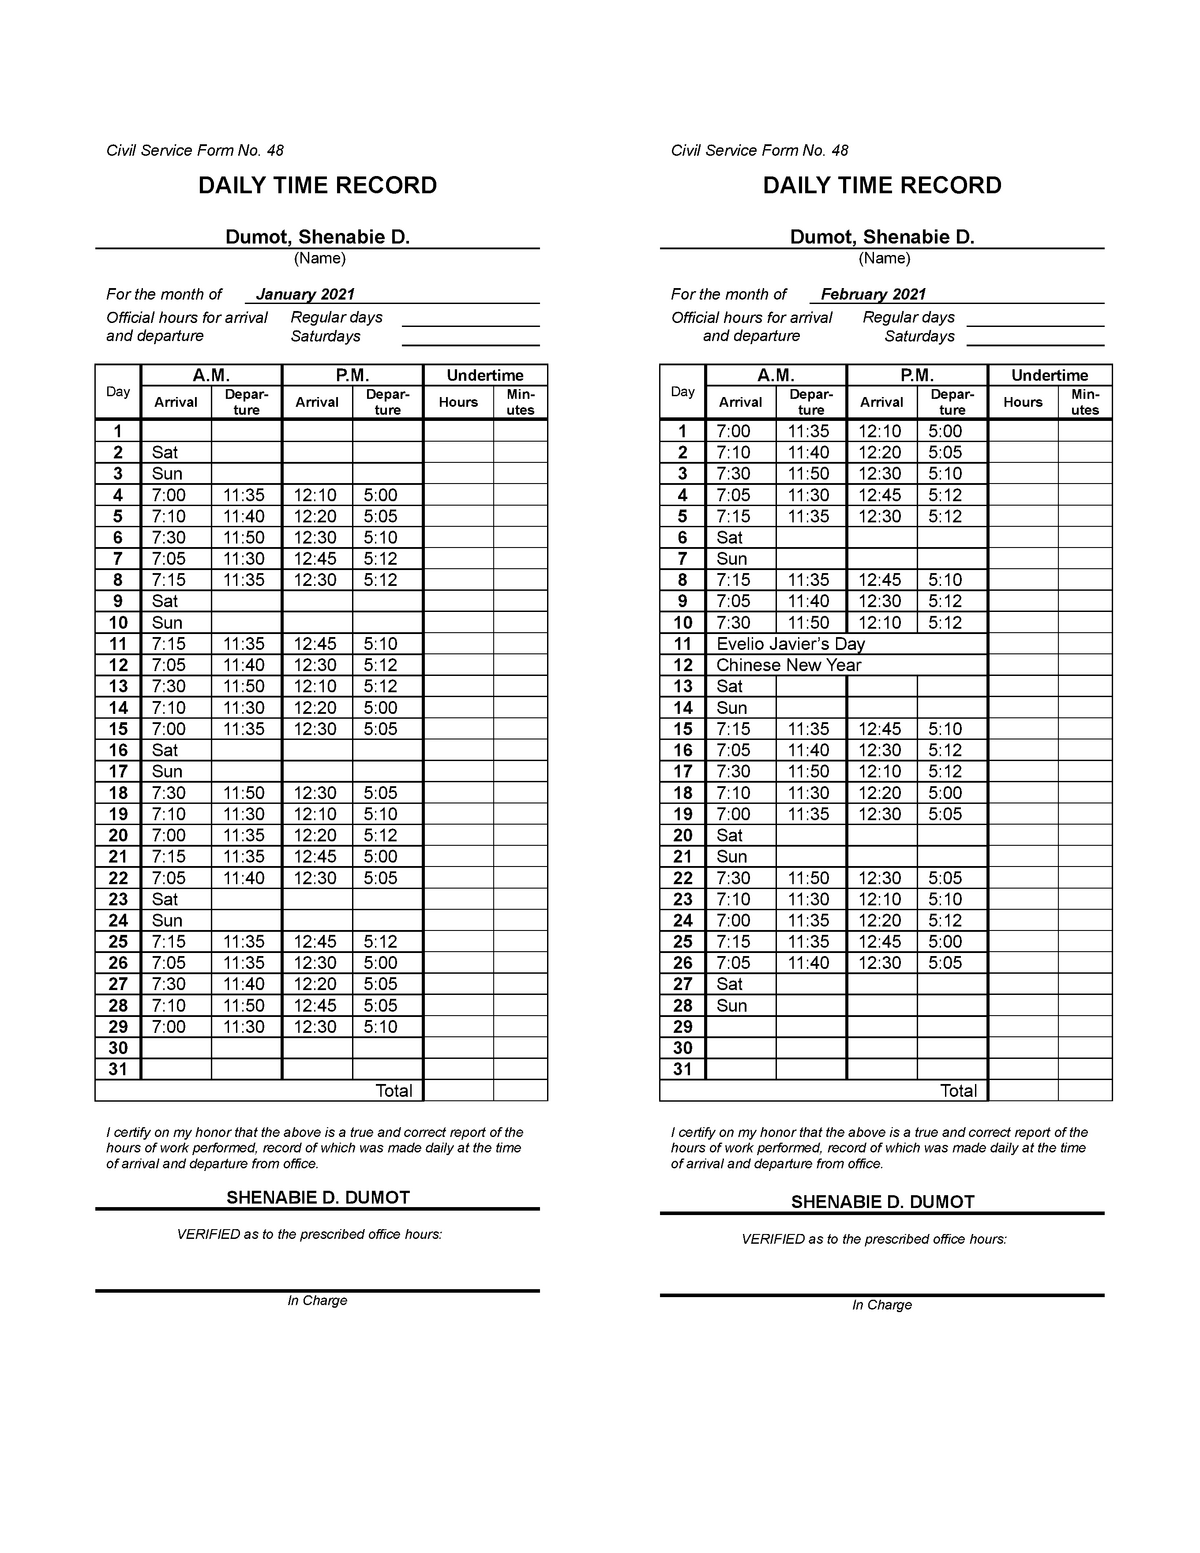 Daily Time Record (DTR) - Civil Service Form No. 48 DAILY TIME RECORD ...